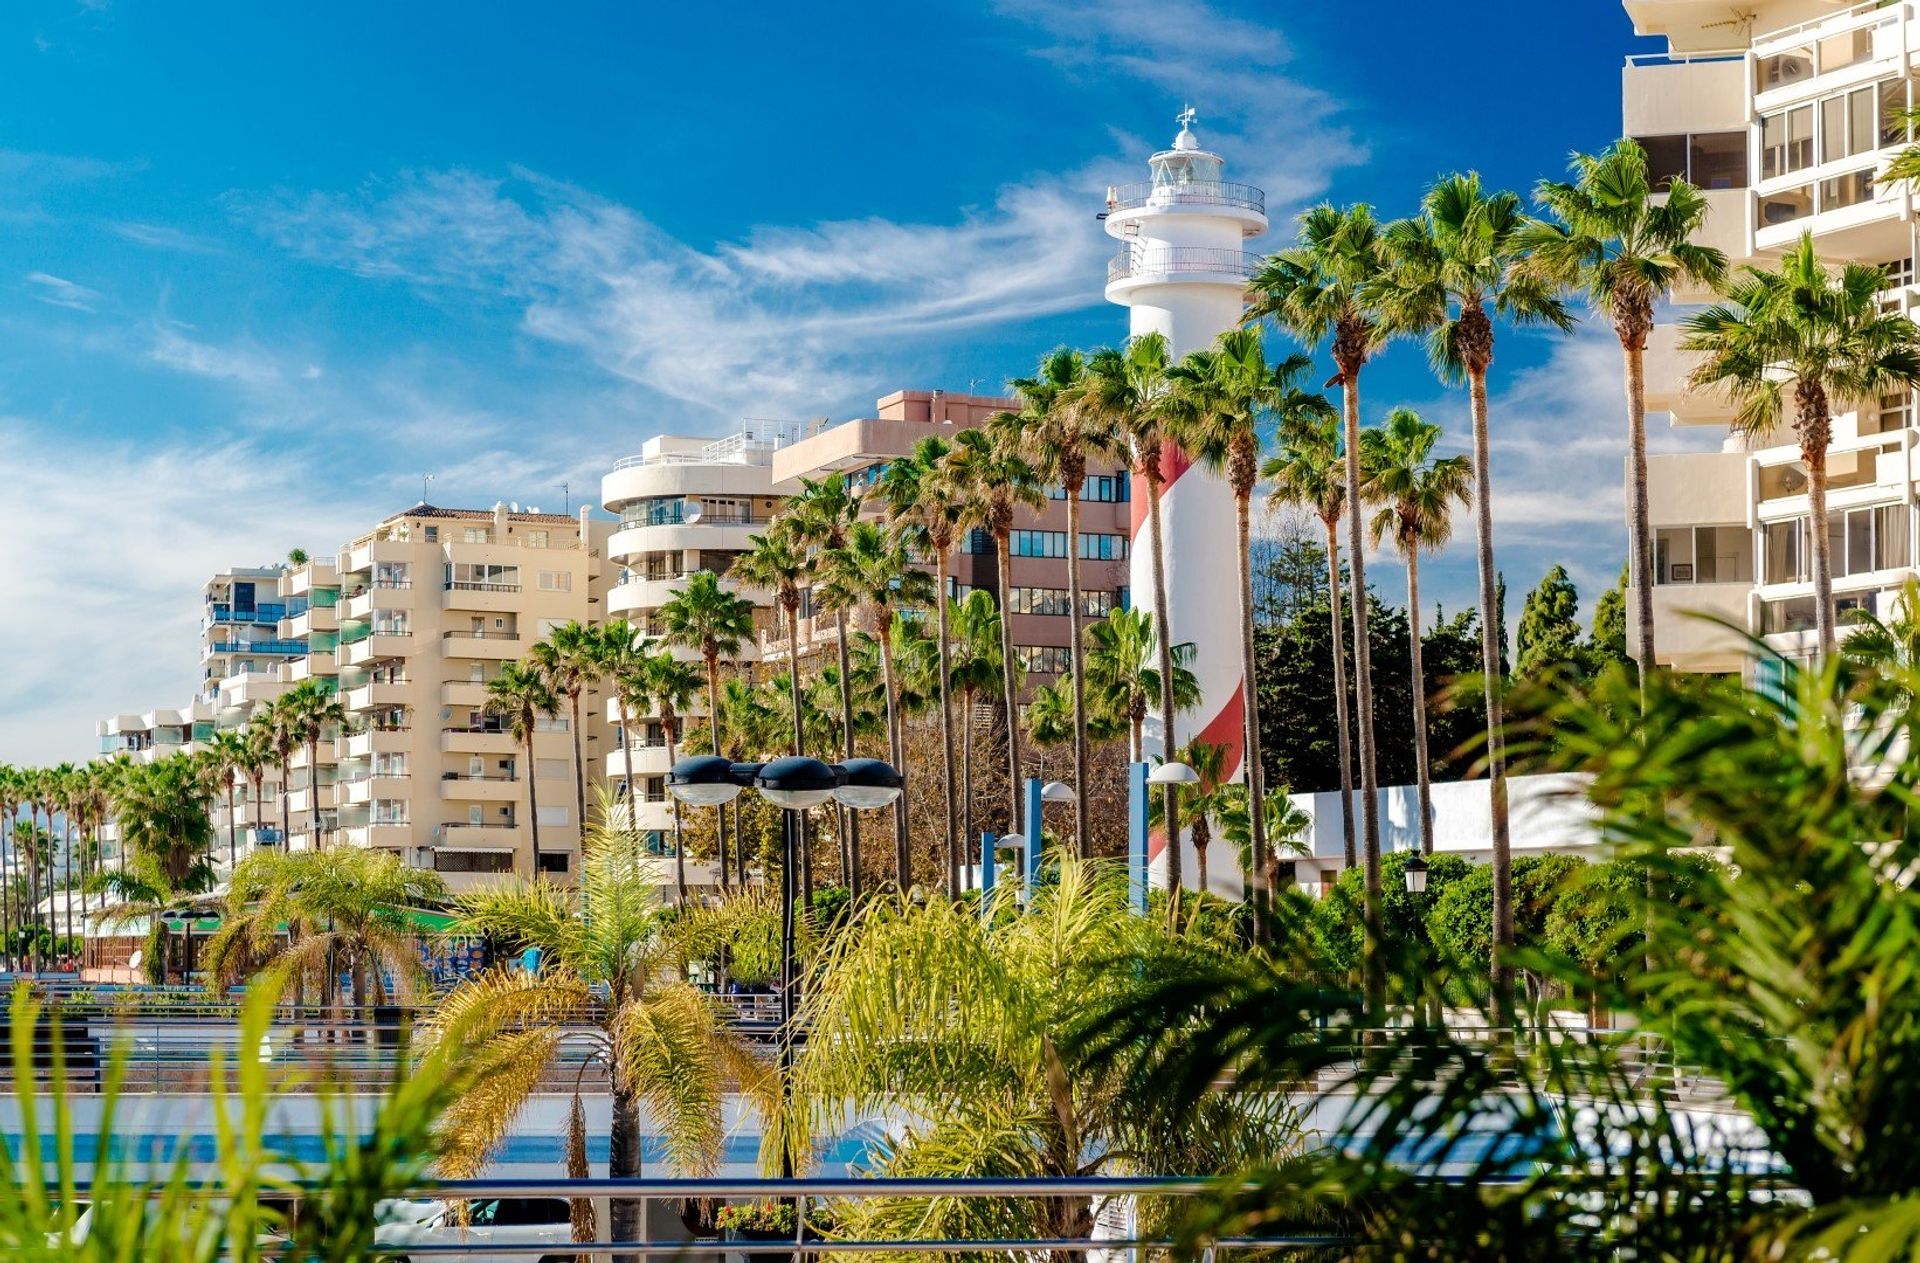 The luxury palm-lined, terraced apartment rentals along Marbella's coast